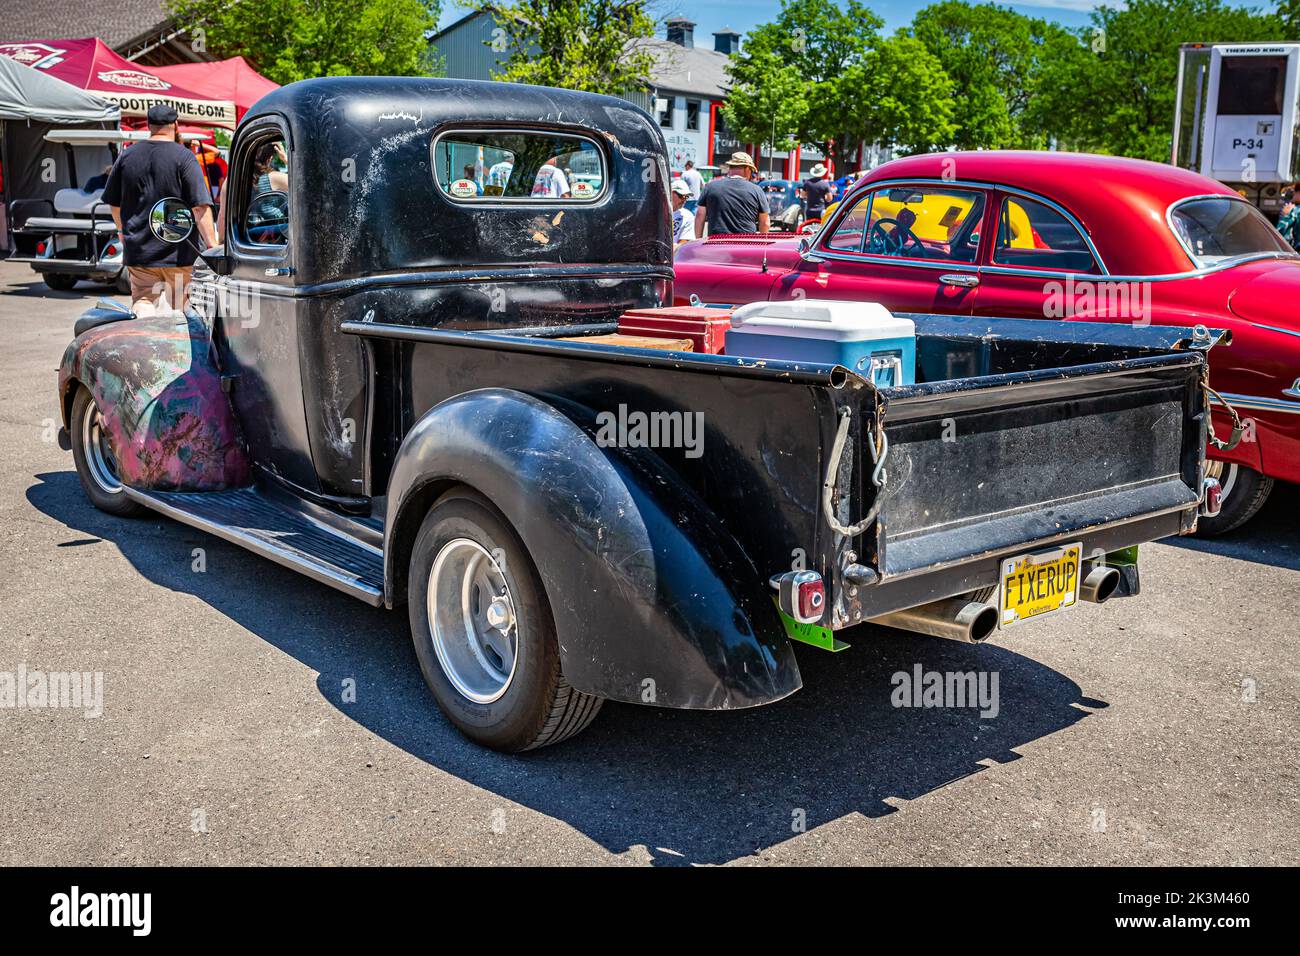 Falcon Heights, MN - June 18, 2022: High perspective rear corner view of a 1946 Chevrolet AK Series Pickup Truck at a local car show. Stock Photo